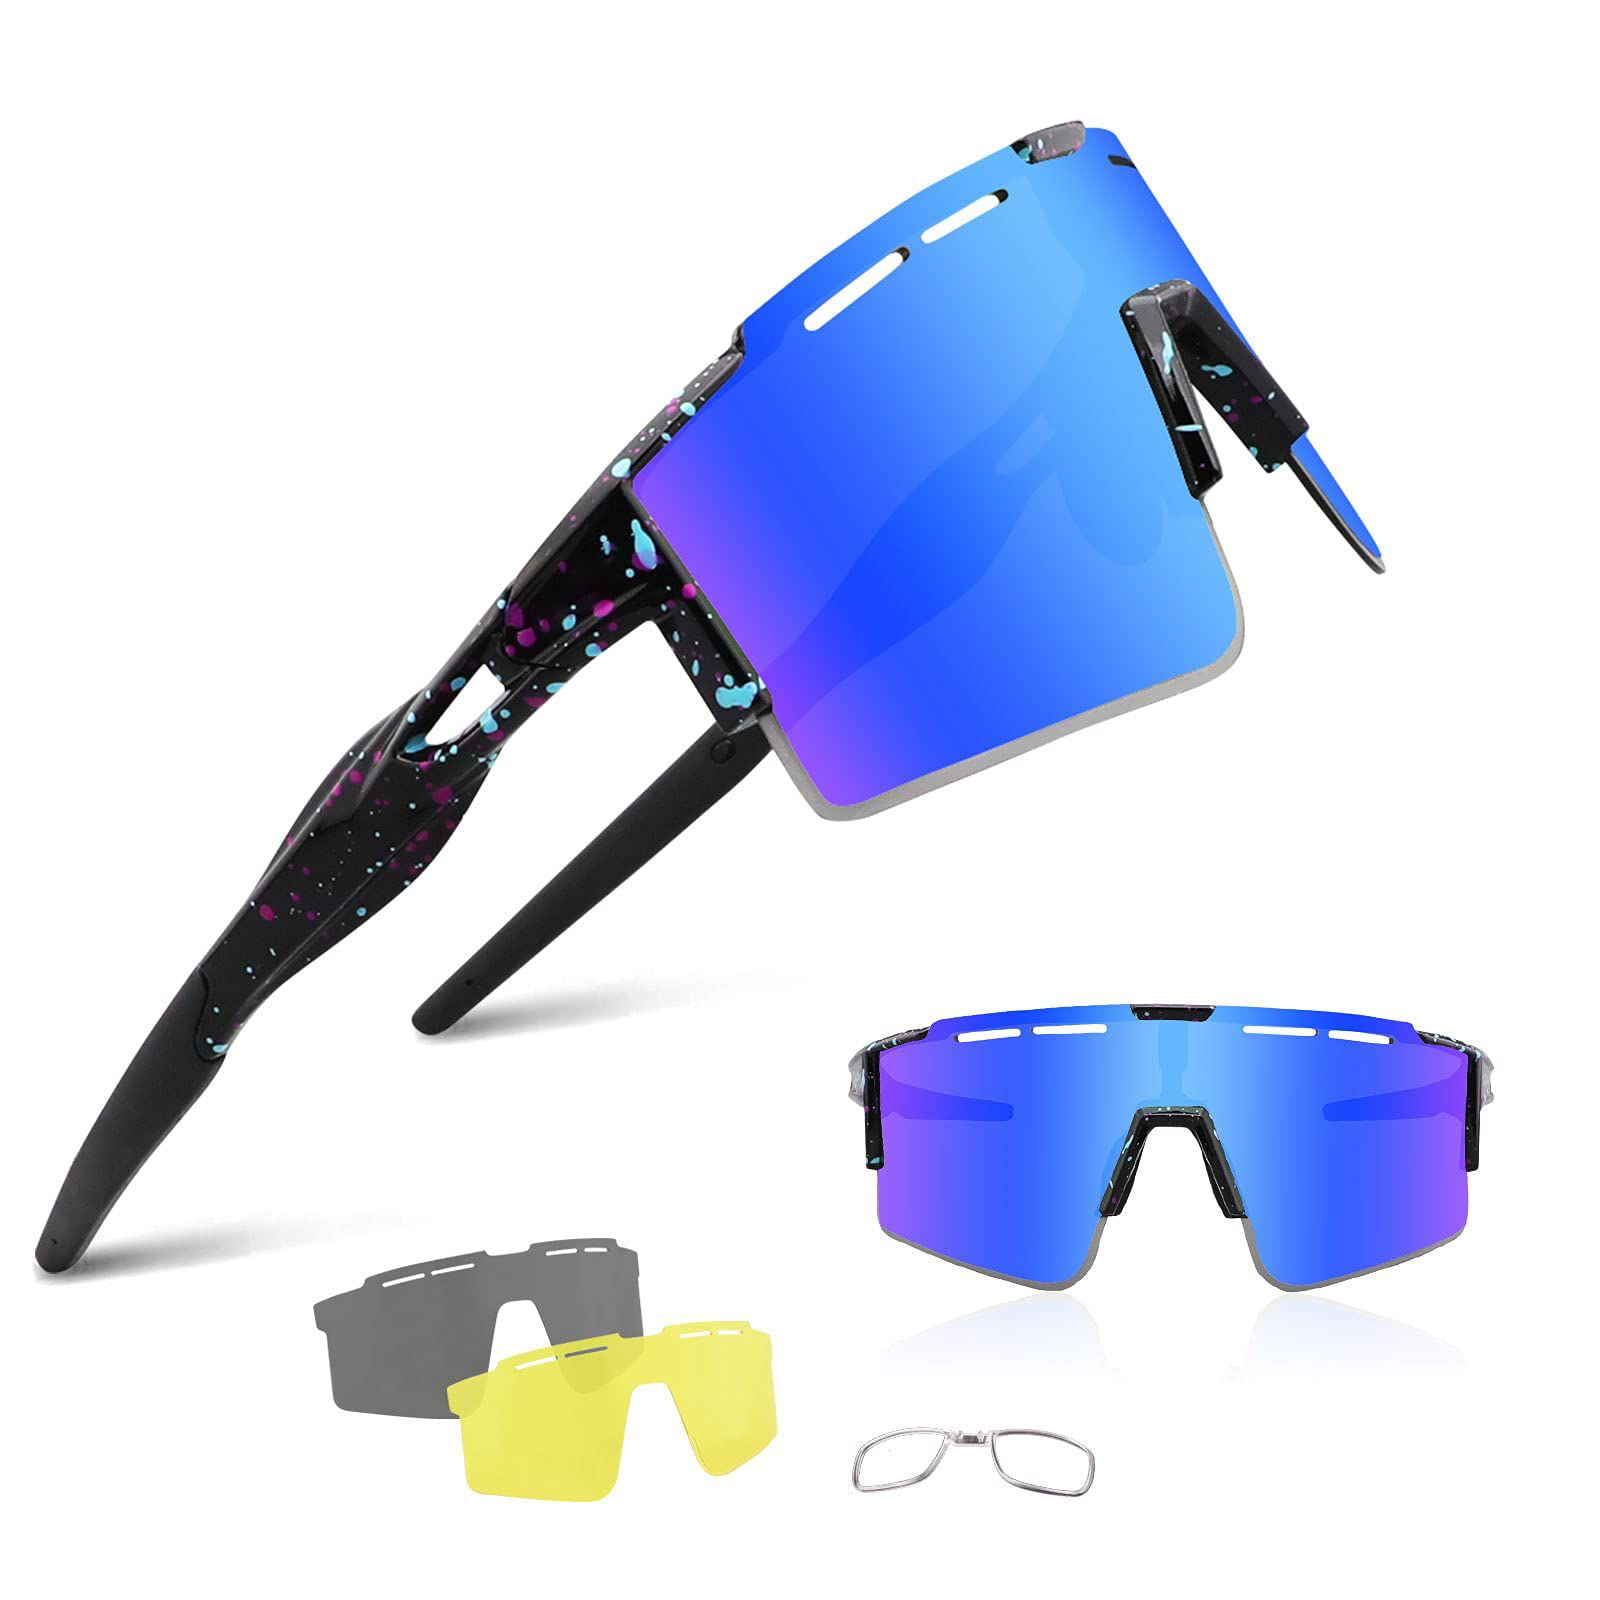 Ukoly Cycling Sunglasses Sports Sunglasses for Women Men with 3 Interchangeable Lenses Baseball Running Glasses